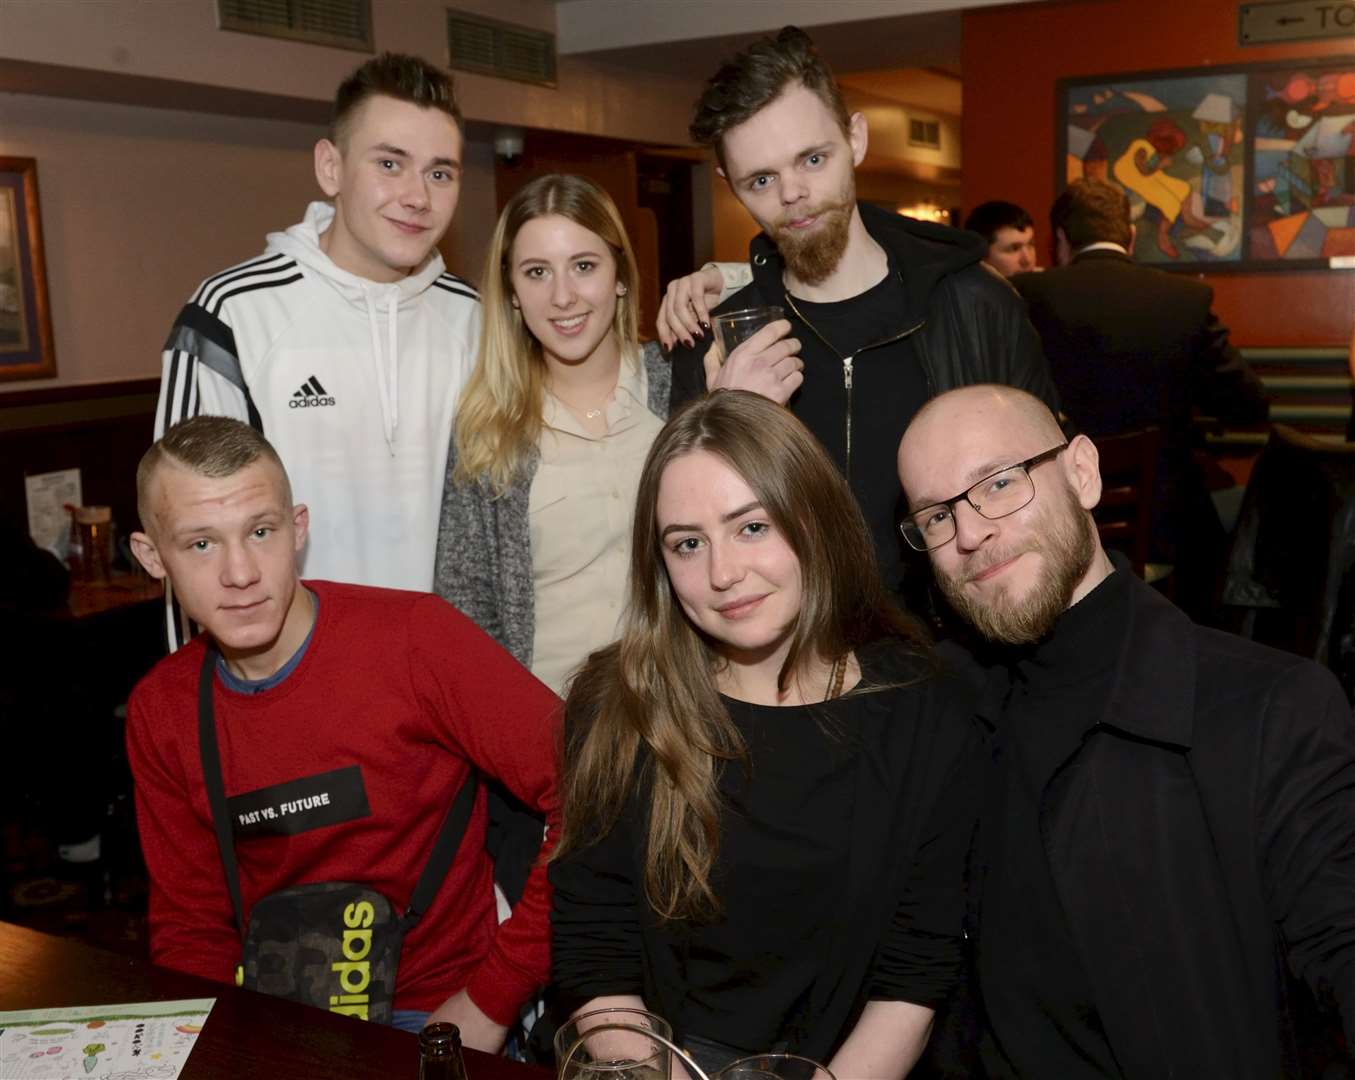 Maciej Jagielo (right, back) on his 21st birthday celebration with friends. Picture: Gary Anthony.